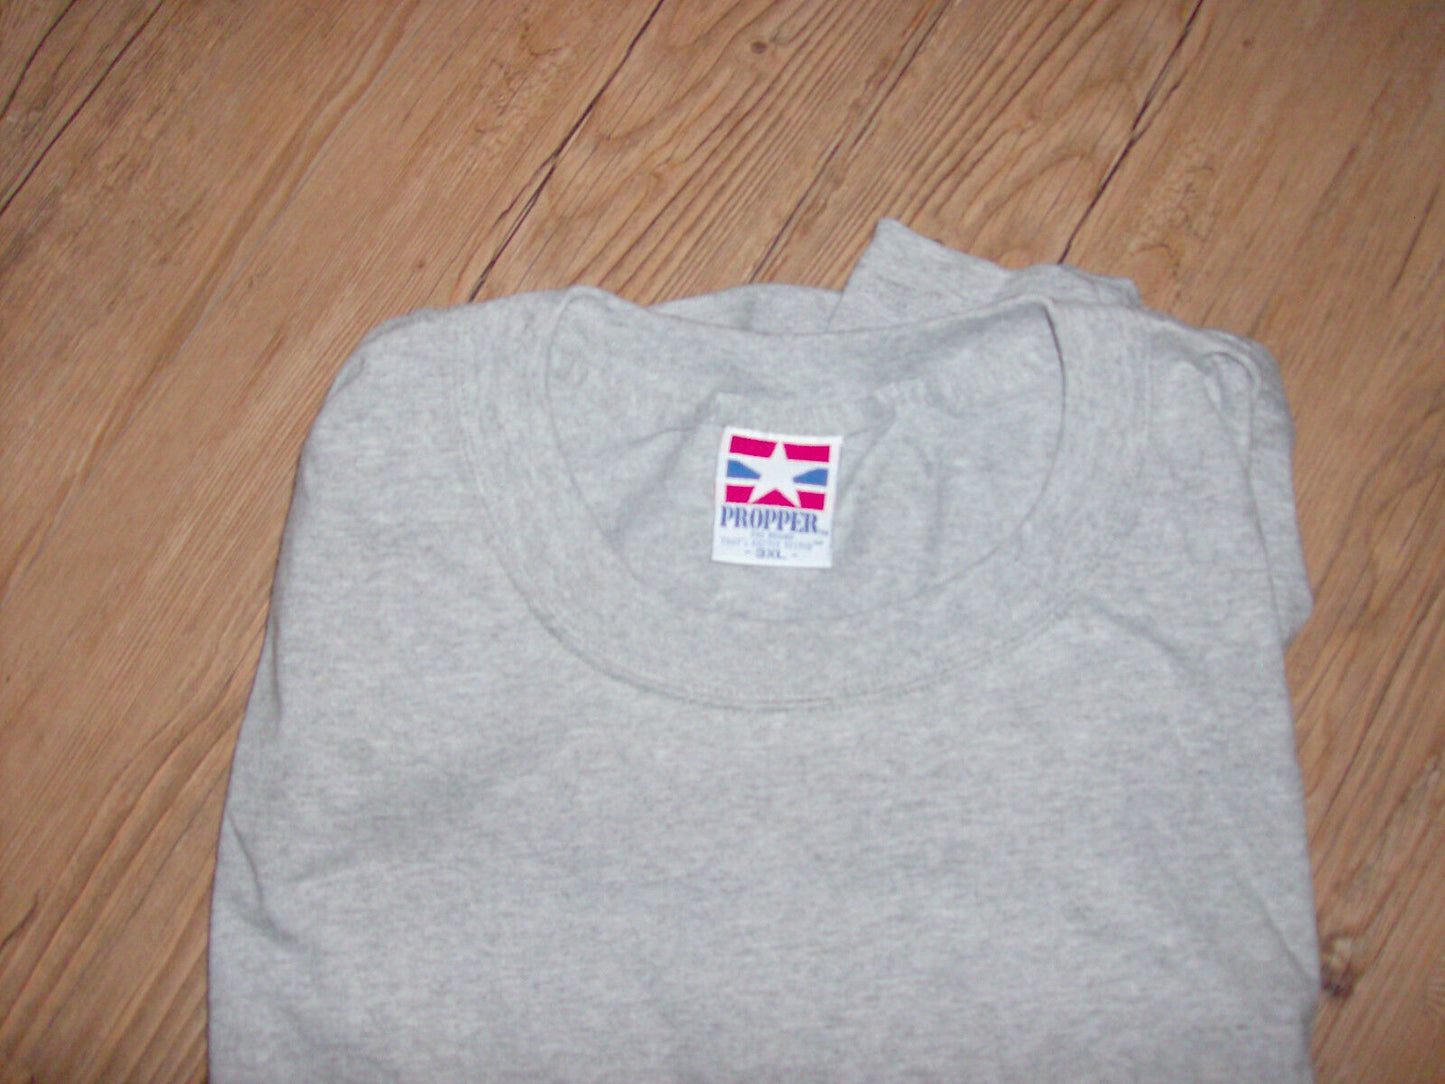 U.S MILITARY NAVY GRAY T SHIRT SIZE XXX- LARGE MADE IN THE U.S.A BY PROPPER